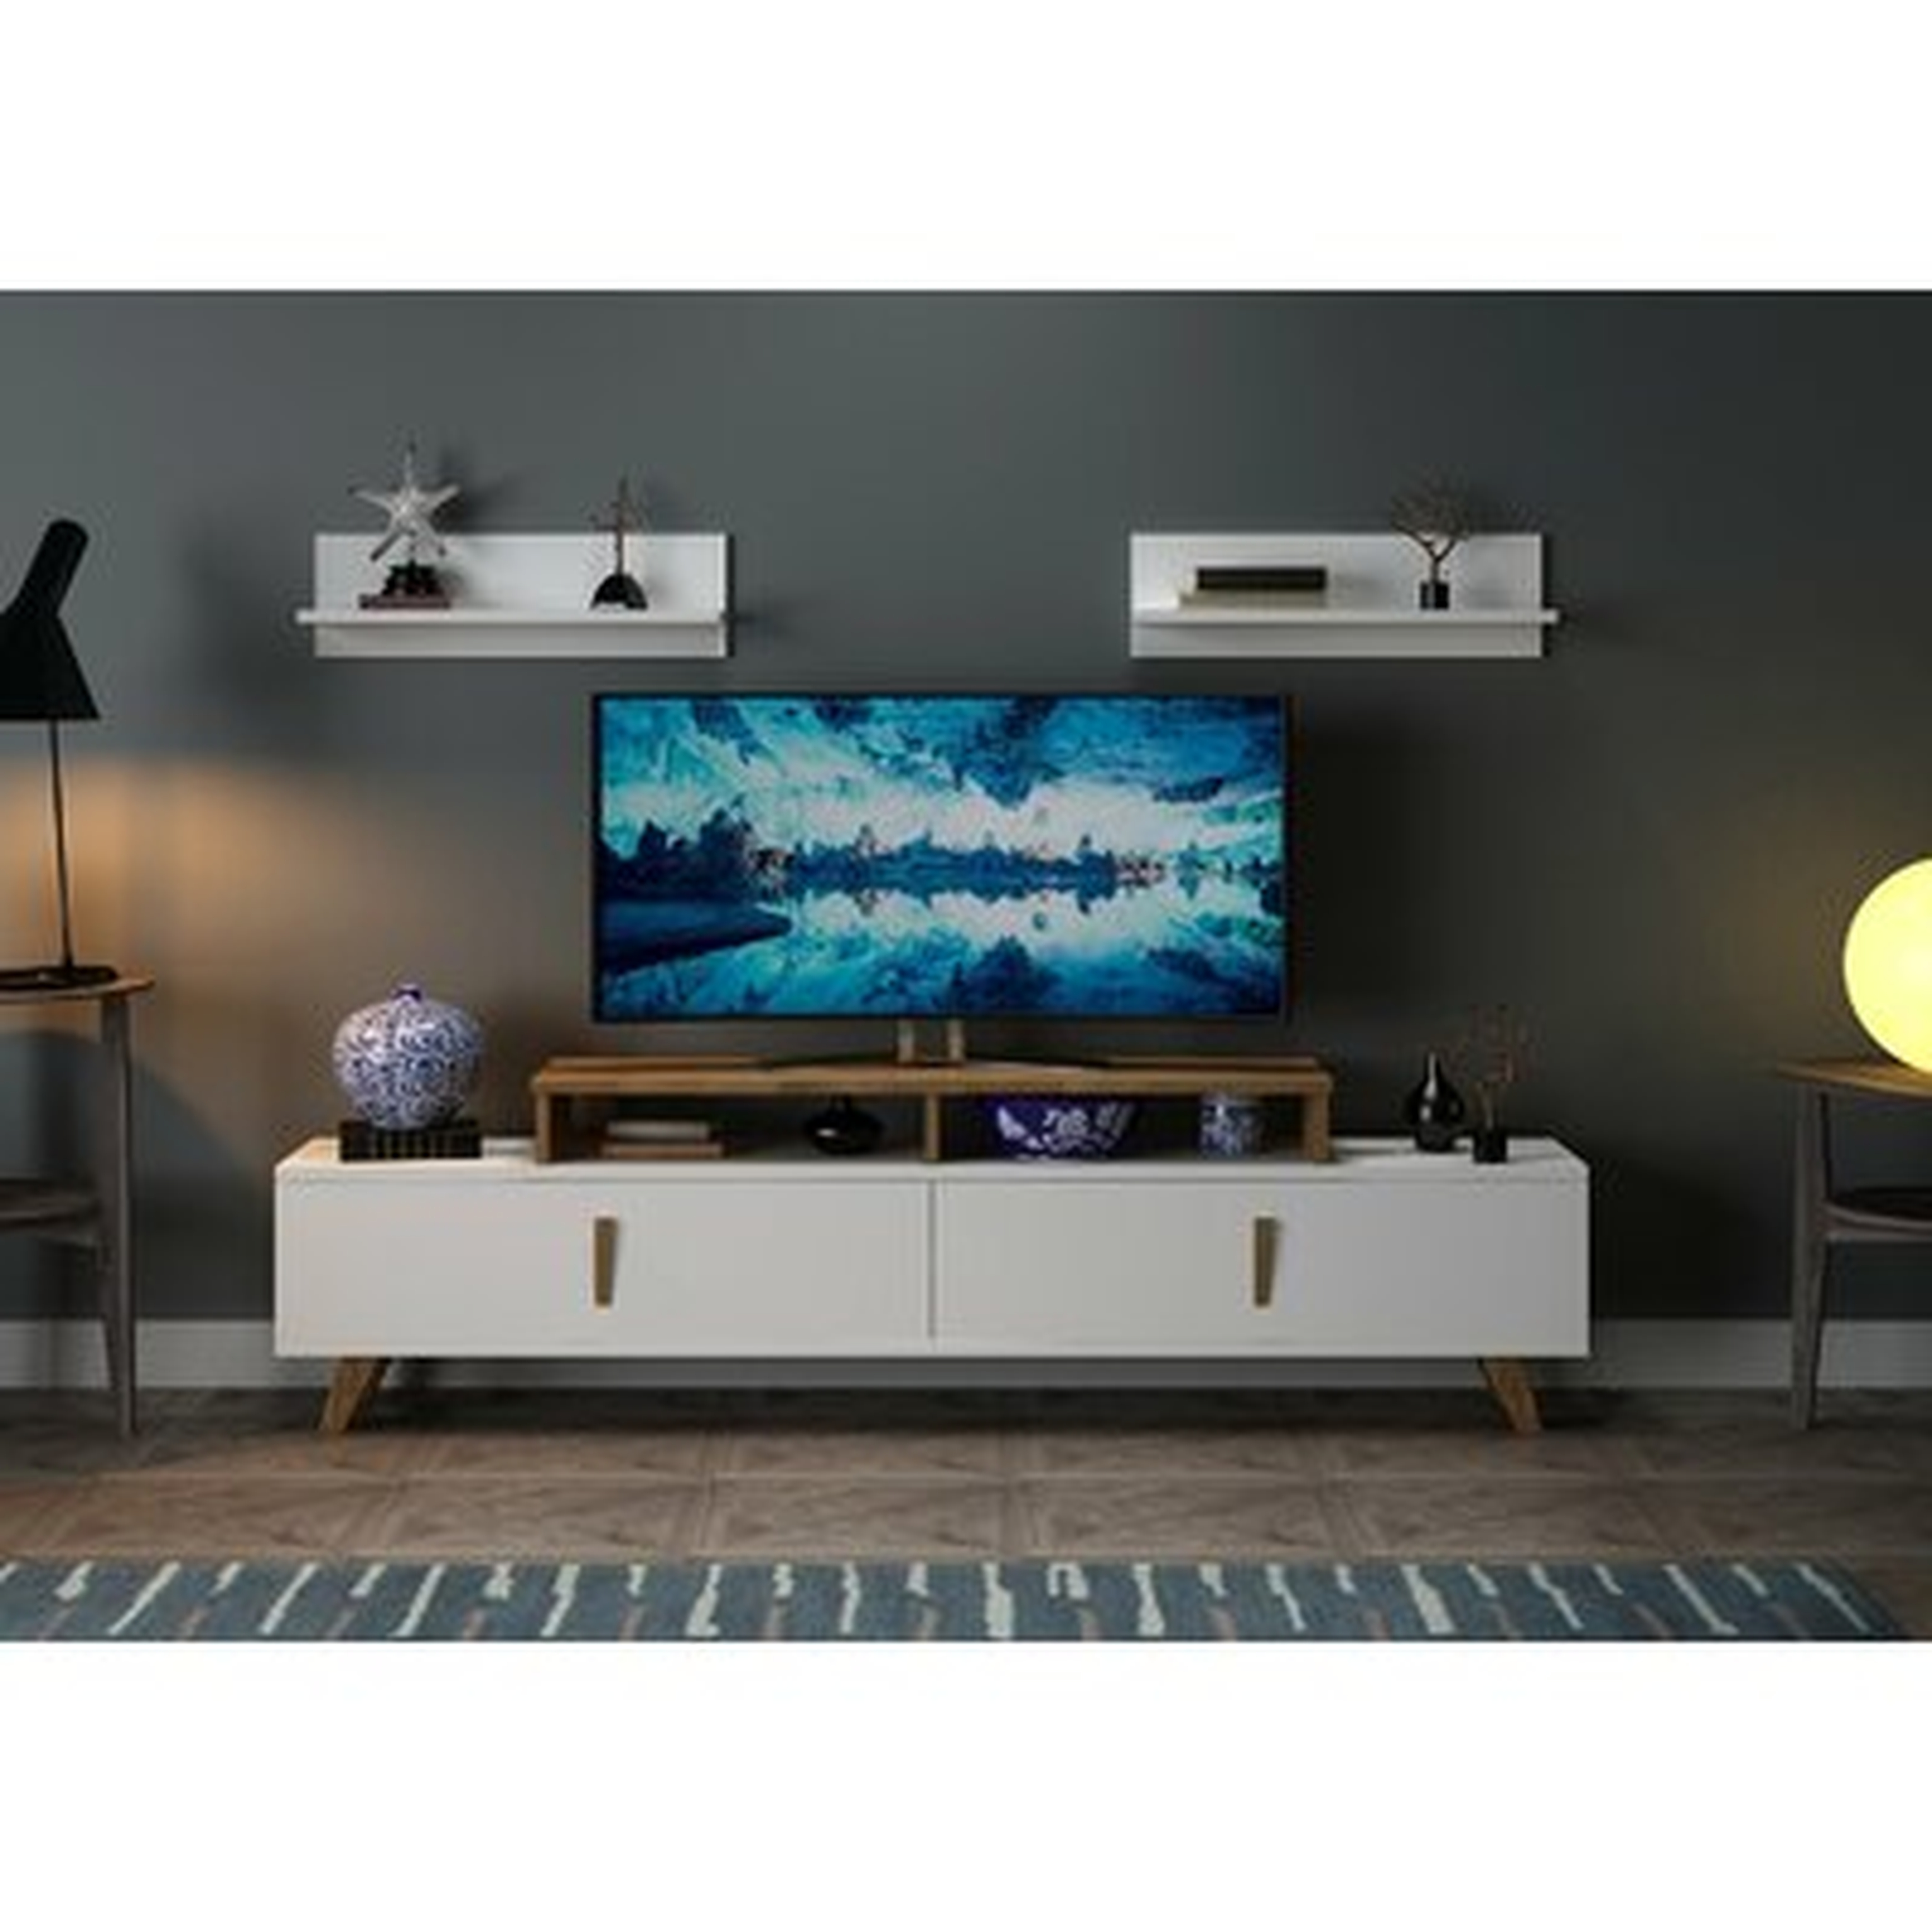 Jacksonwald Cabinet Storage TV Stand for TVs up to 75 inches - Wayfair